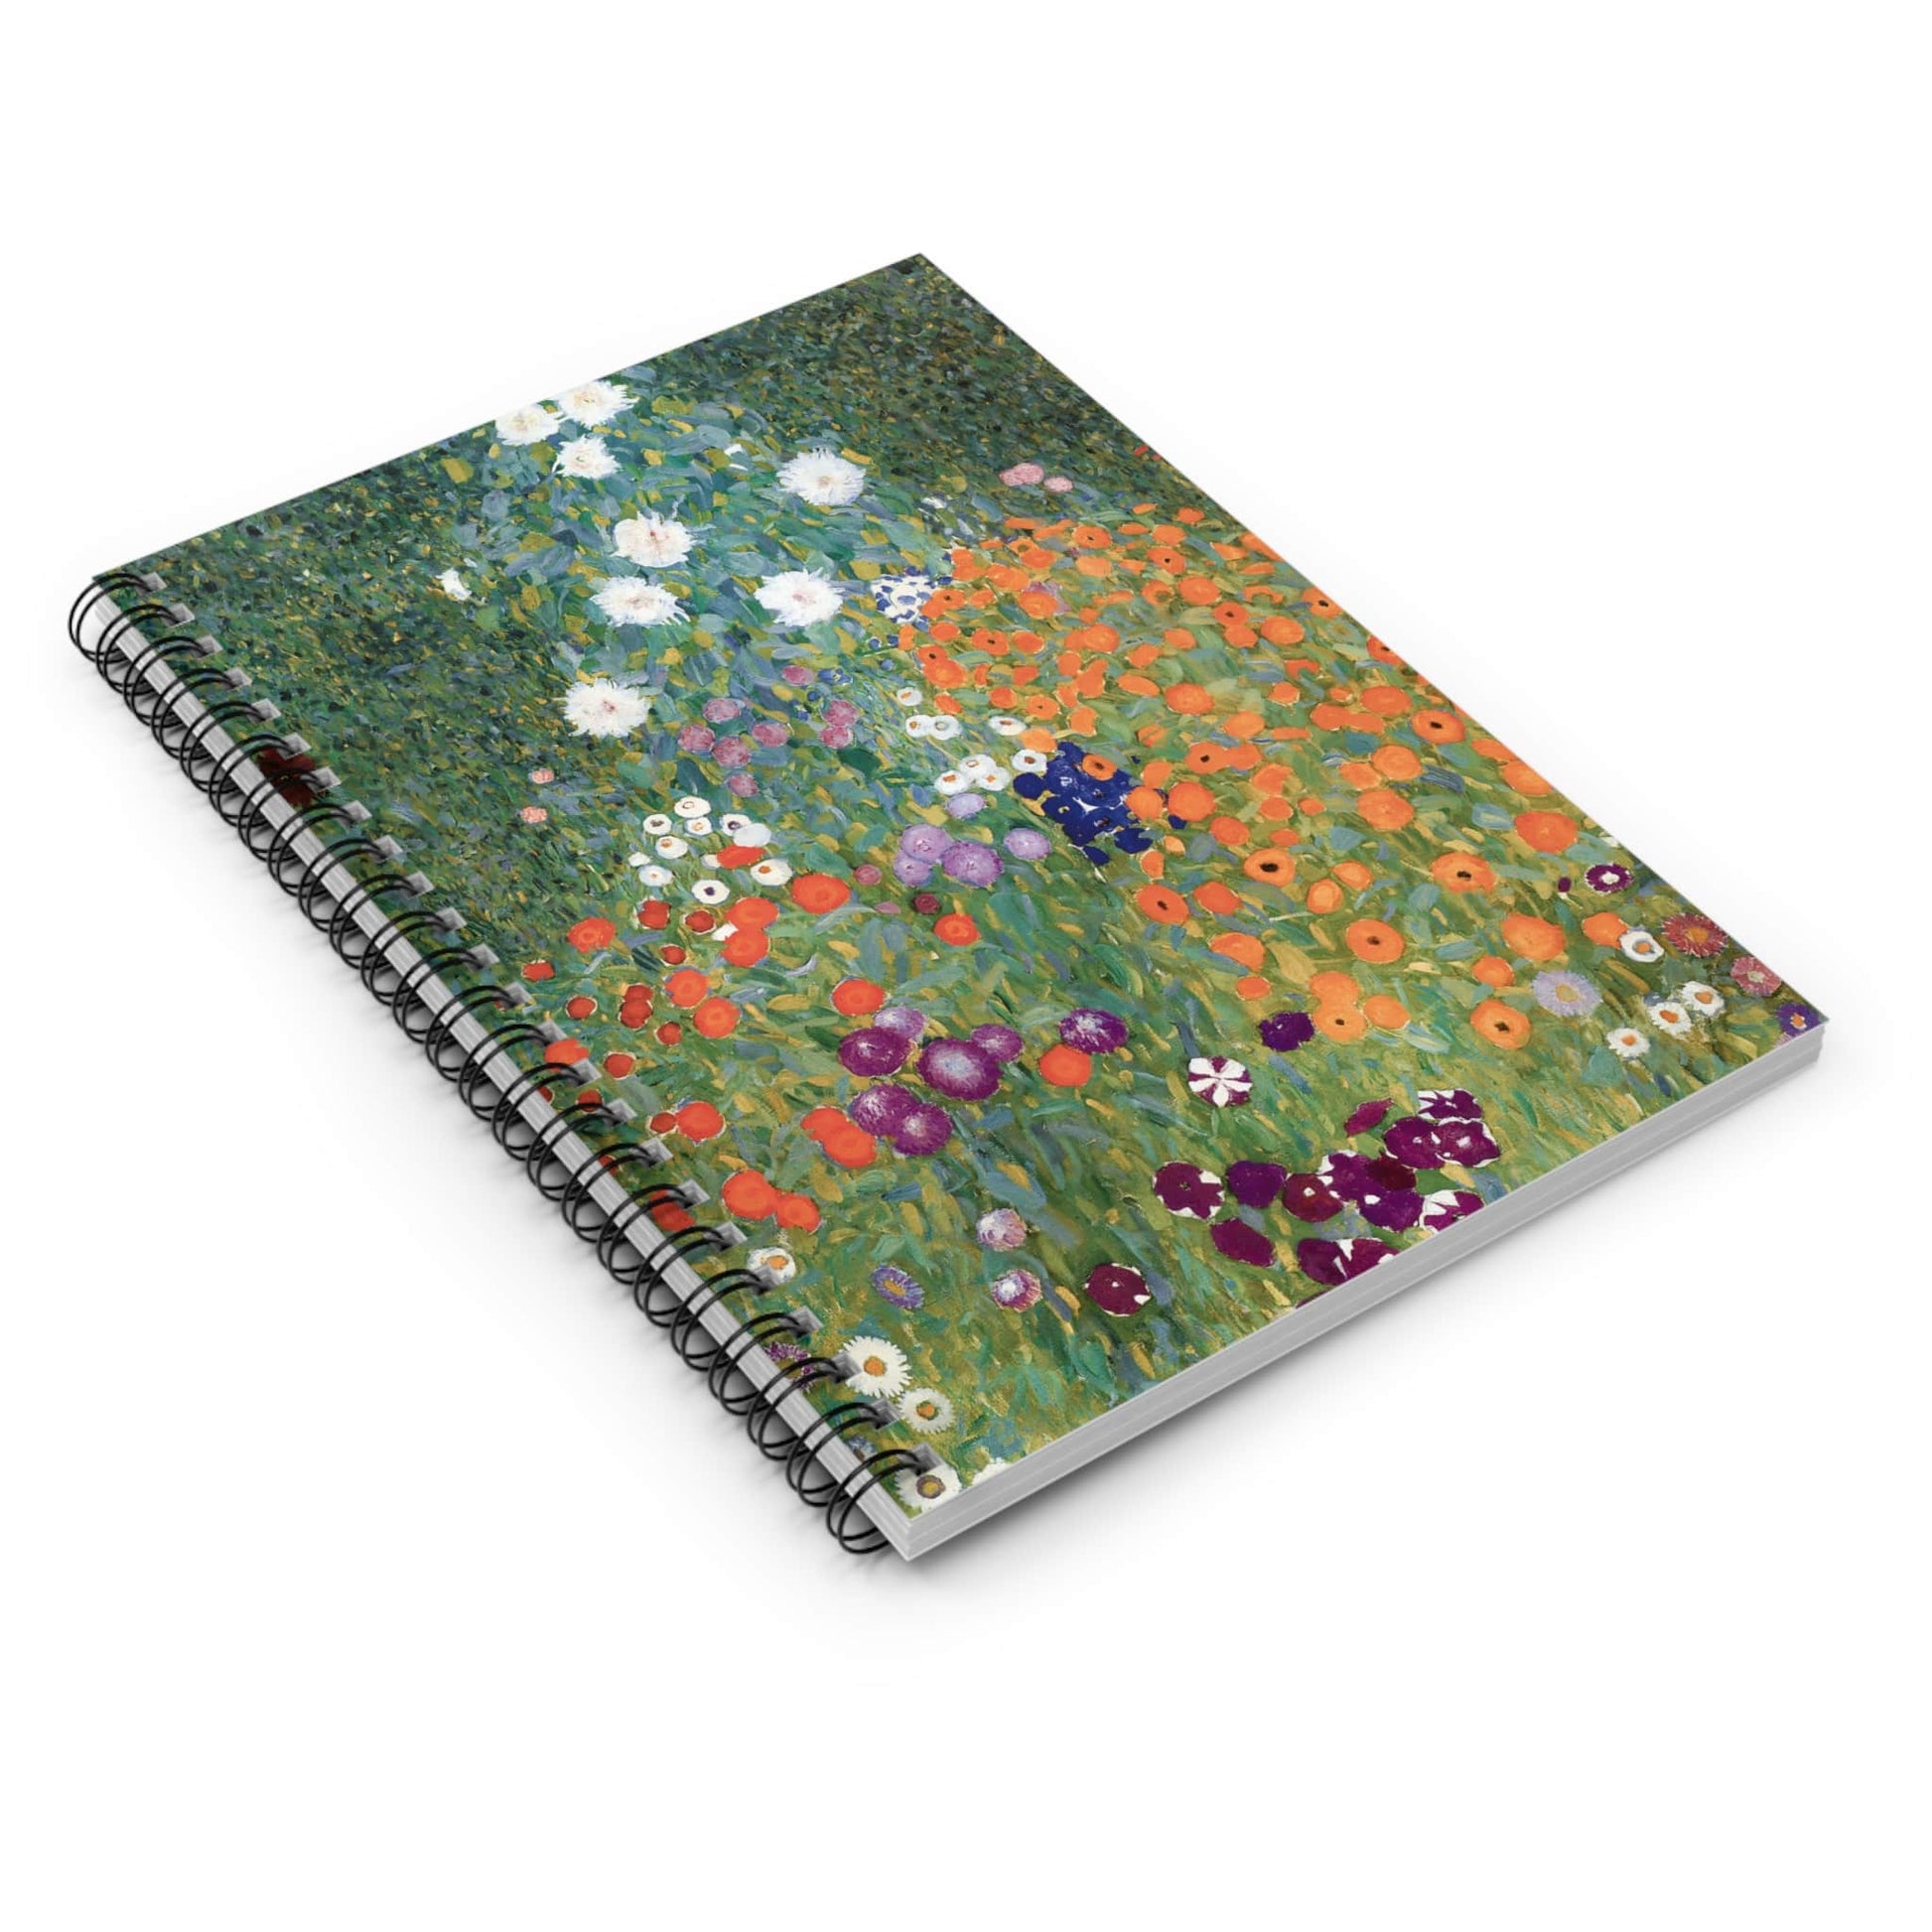 Beautiful Flowers Spiral Notebook Laying Flat on White Surface